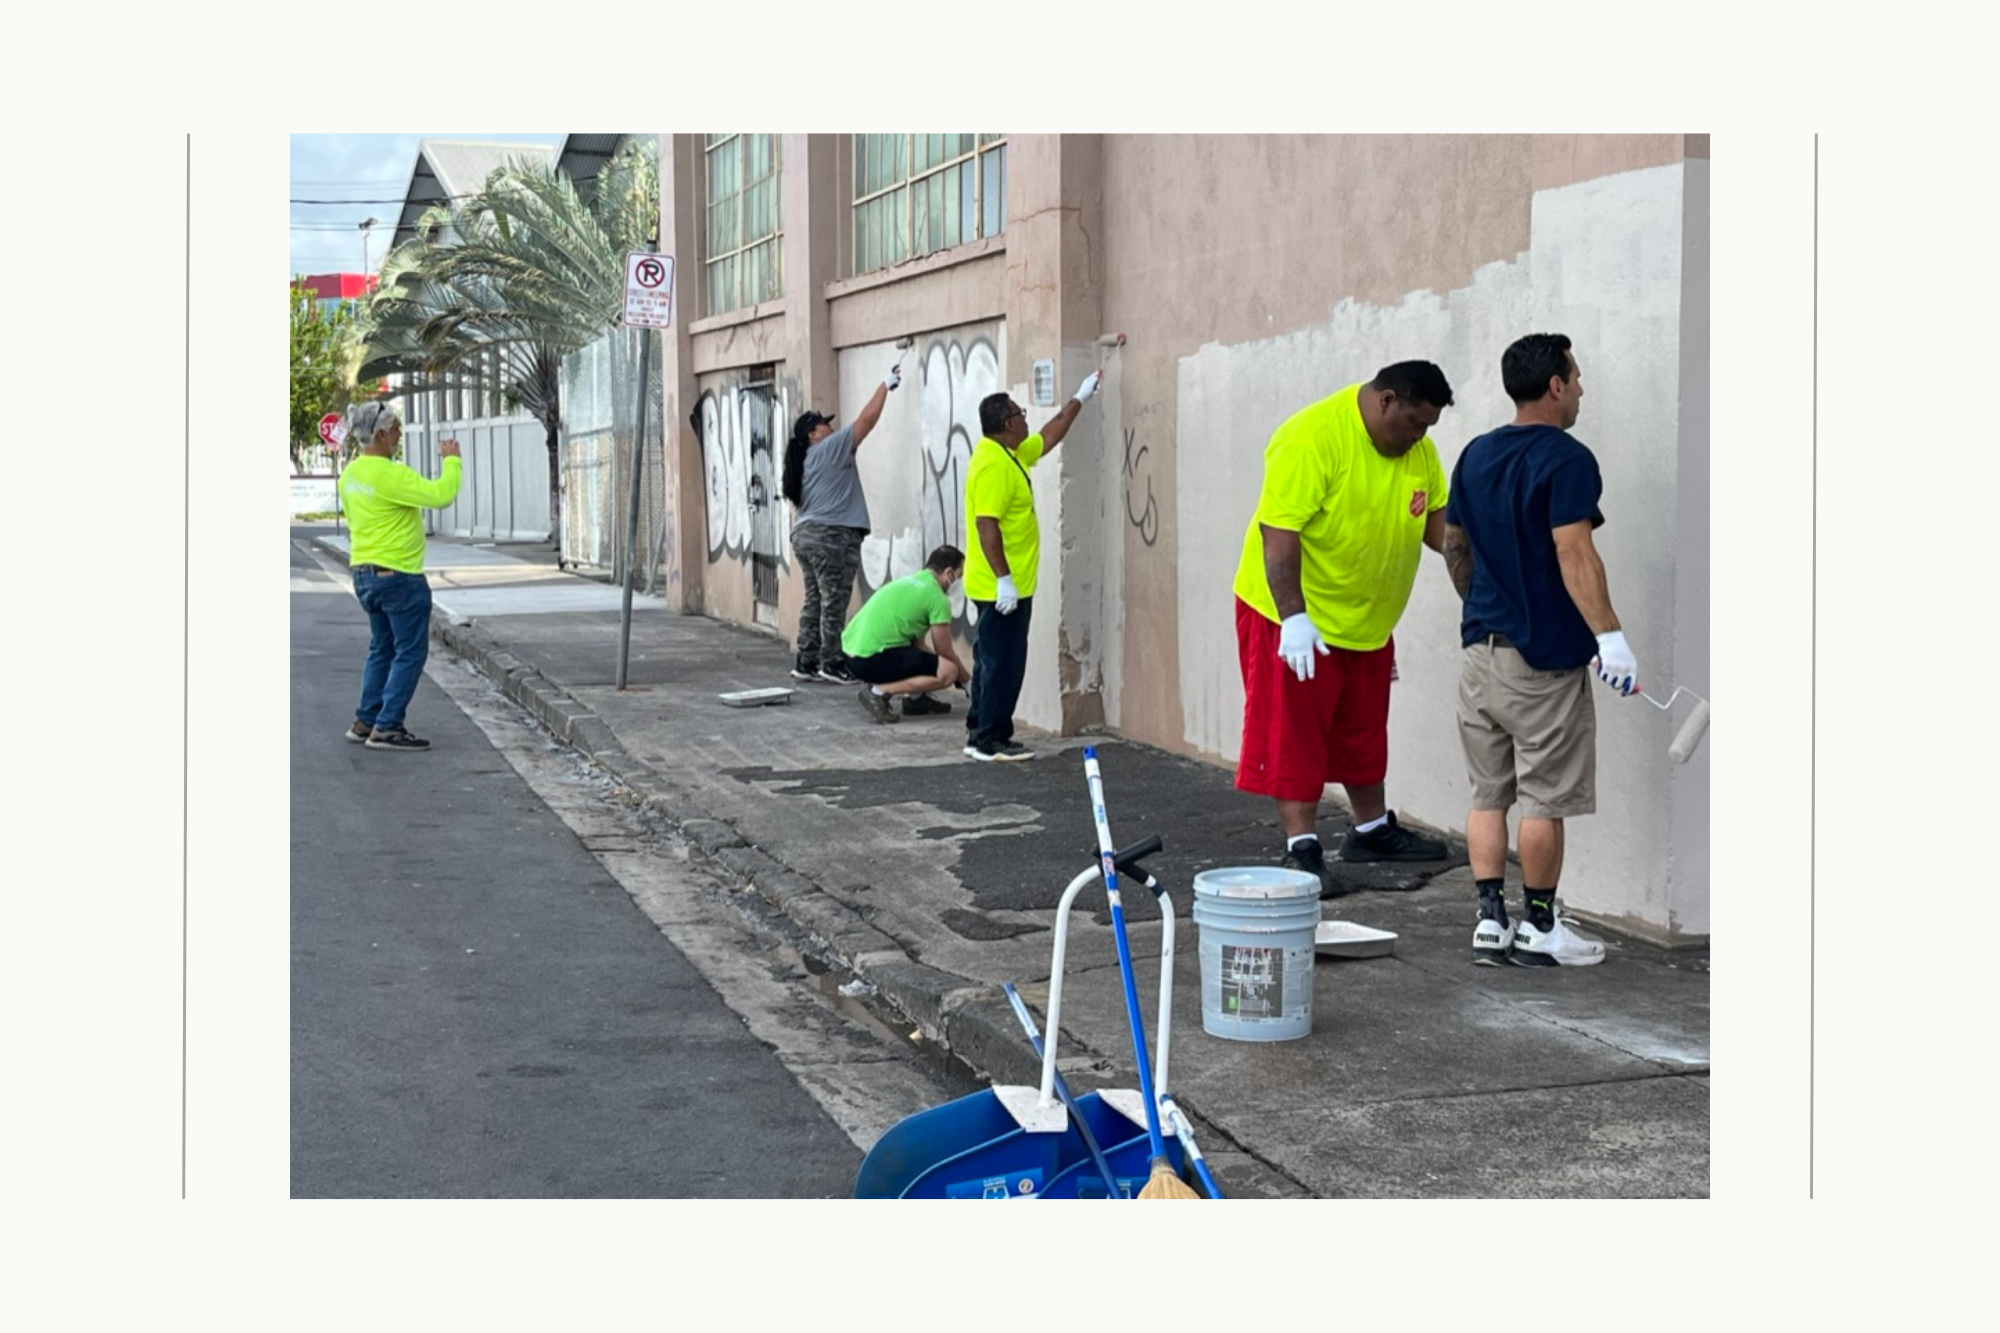 Neighborhood streets of Honolulu get a new look thanks to volunteers with the ARC